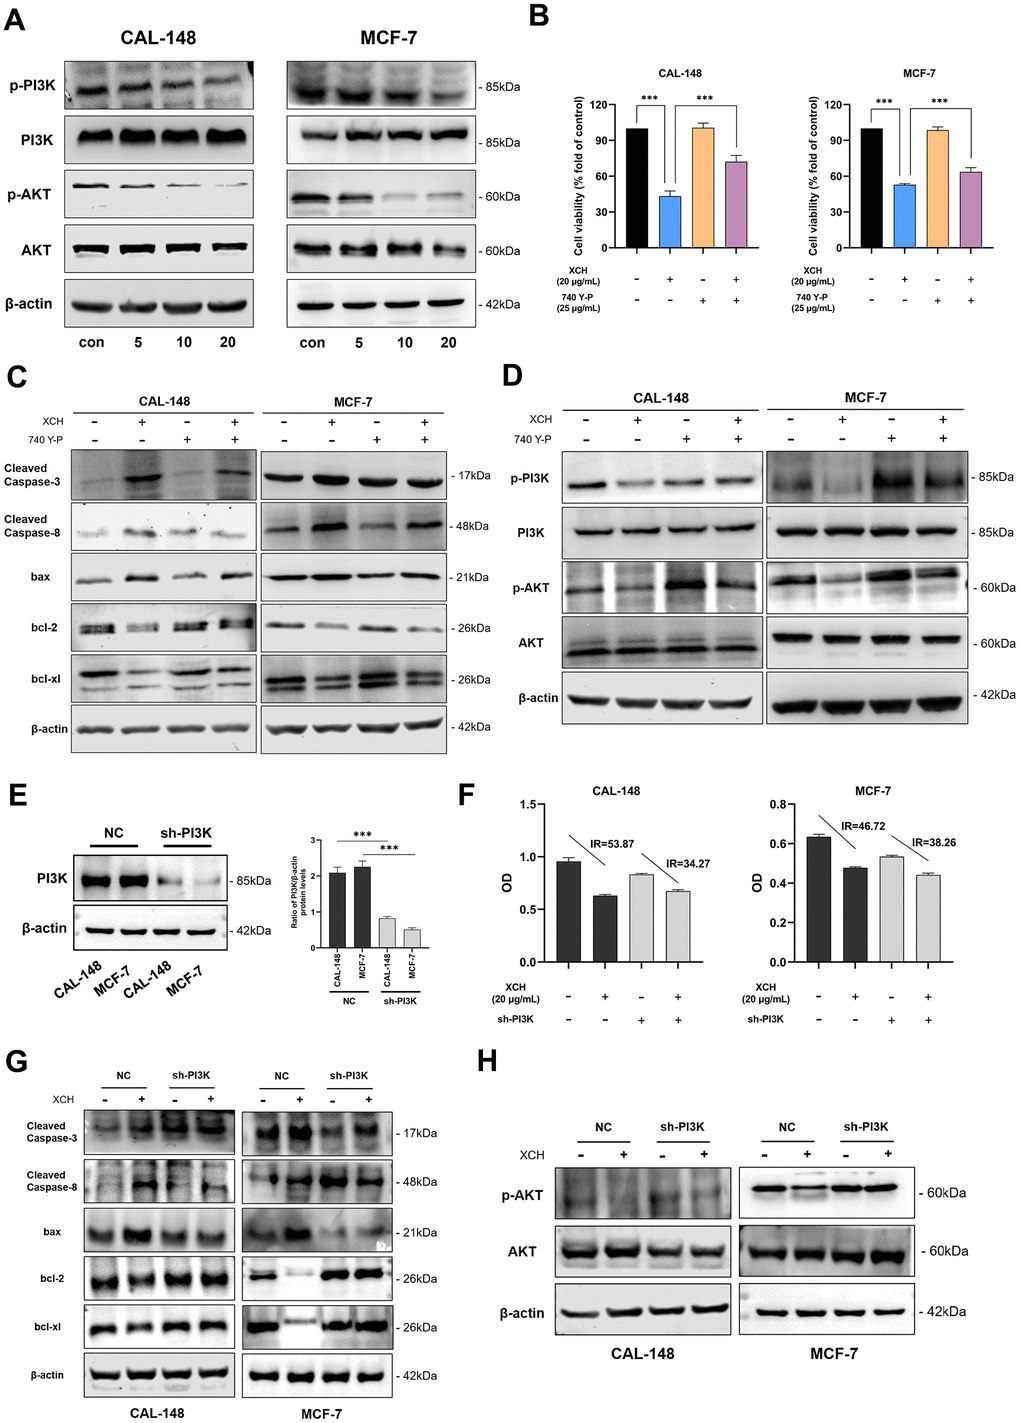 Xiaochaihu decoction induced the apoptosis of breast cancer cells by inhibiting the PI3K/Akt signaling pathway. (A) The cells were treated with the XCH decoction for 48 hours, and the protein expression of the PI3K/Akt signaling pathway was detected by Western blotting. (B) Cell viability was determined by CCK-8. (C, D) The cells were pretreated with a PI3K agonist (740 Y-P, 25 μg/mL) for 3 hours and then treated with or without the XCH decoction (20 μg/mL) for 48 hours. The expression levels of proteins associated with apoptosis and PI3K/Akt signaling pathway proteins were measured by Western blotting. (E) Knockdown of PI3K in breast cancer cells by lentivirus. (F) CCK-8 was used to detect the effect of the XCH decoction on breast cancer cells after PI3K knockdown. (G, H) Effect of the XCH decoction on apoptosis and PI3K pathway-related protein expression in breast cancer cells after PI3K knockdown. The data are shown as the mean ± SD of three experiments. ***P 